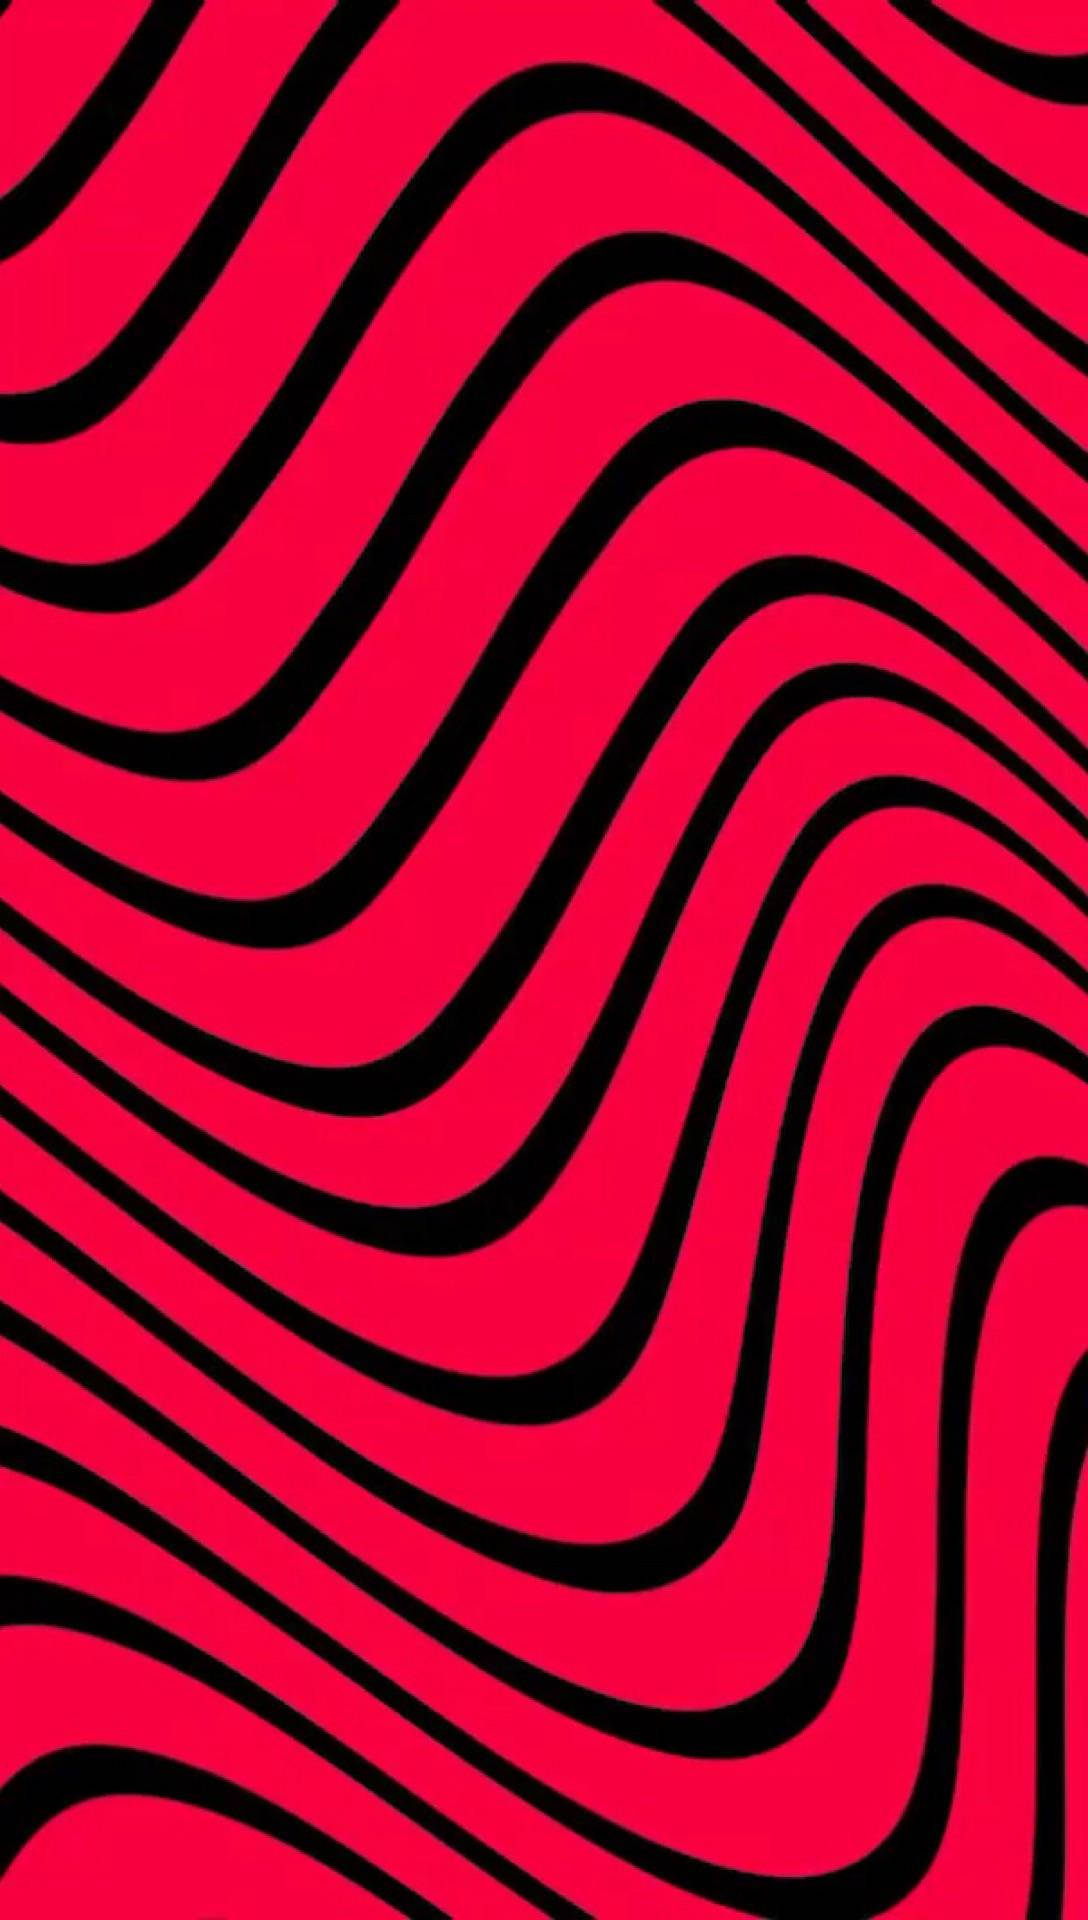 Pewdiepie Waving At His Millions Of Fans Background